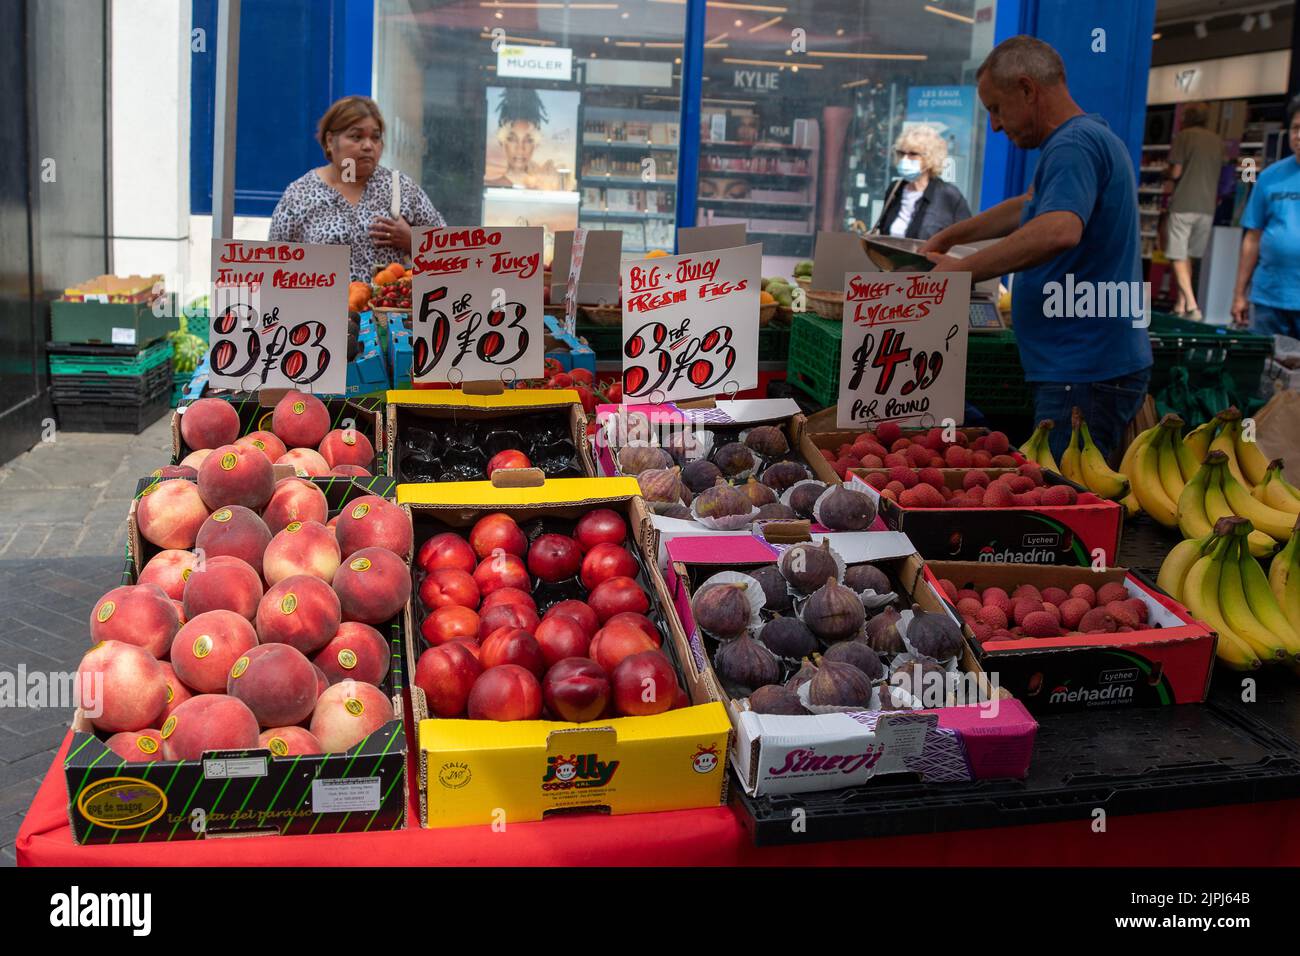 Windsor, Berkshire, UK. 18th August, 2022. A fruit  and veg stall in Peascod Street, Windsor. Inflation has to risen to over 10% now putting more pressure on shoppers. Credit: Maureen McLean/Alamy Stock Photo